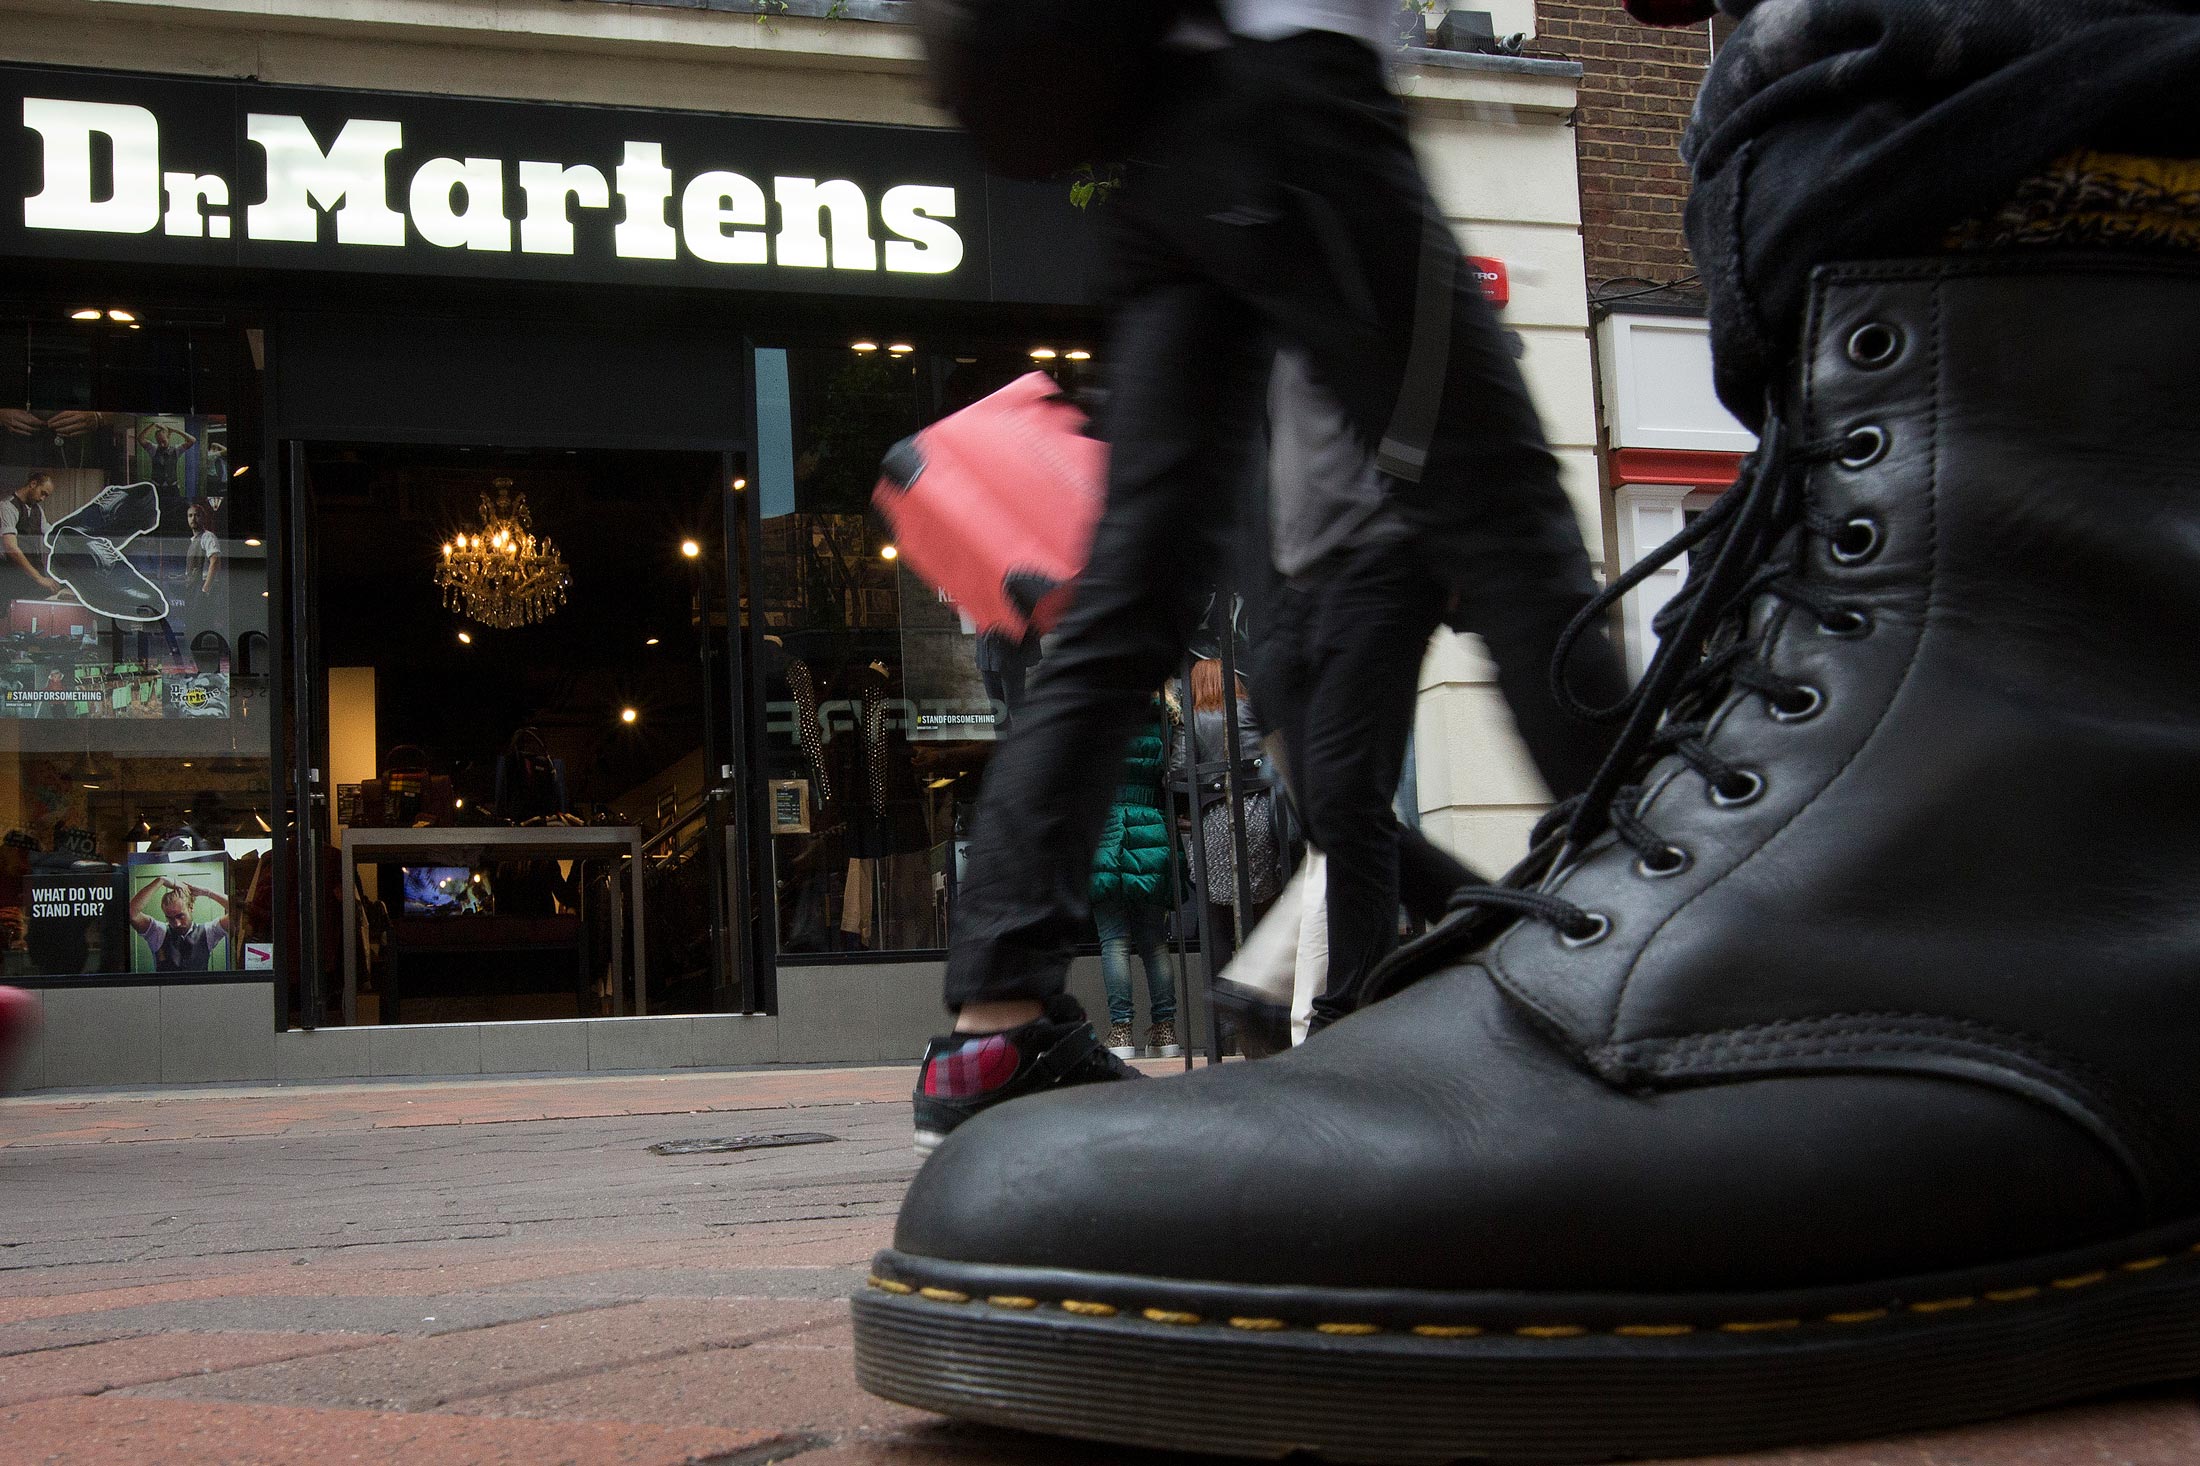 which stores sell doc martens